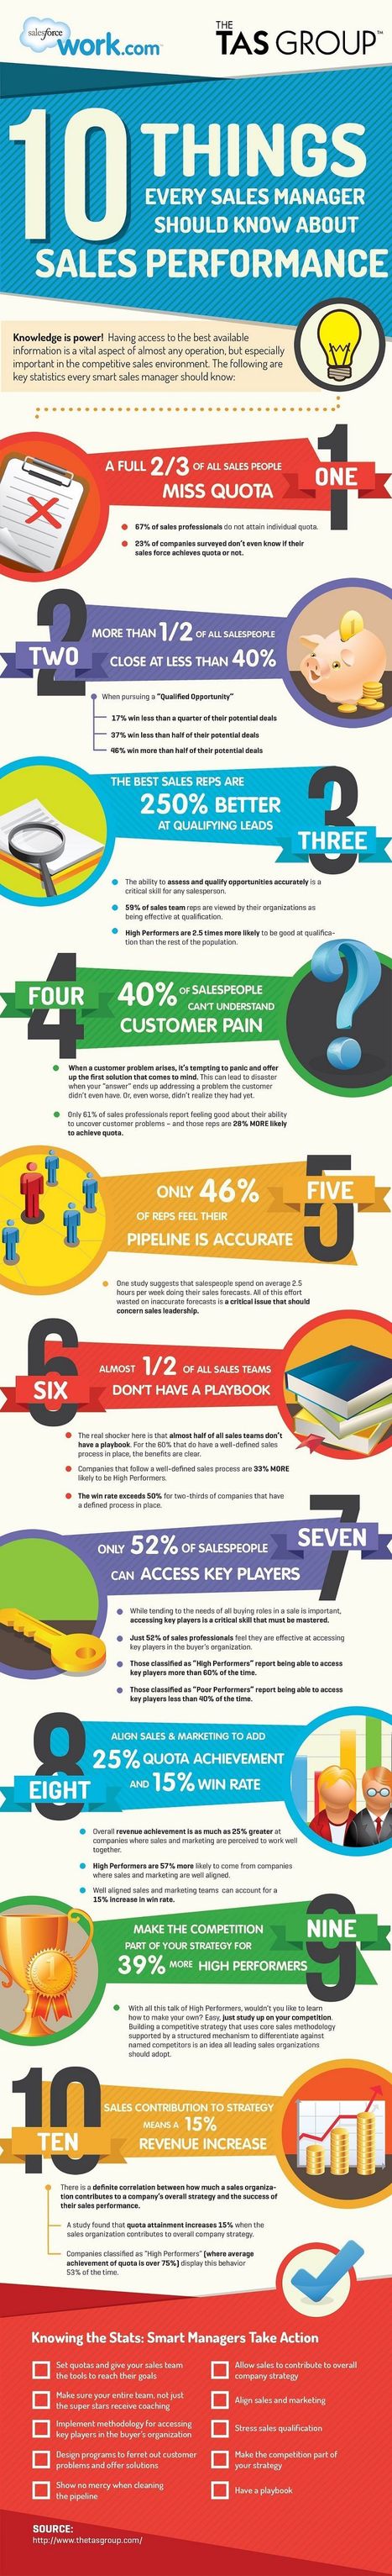 10 Things Every Sales Manager Should Know About Sales Performance [Infographic] - Profs | #TheMarketingAutomationAlert | The MarTech Digest | Scoop.it